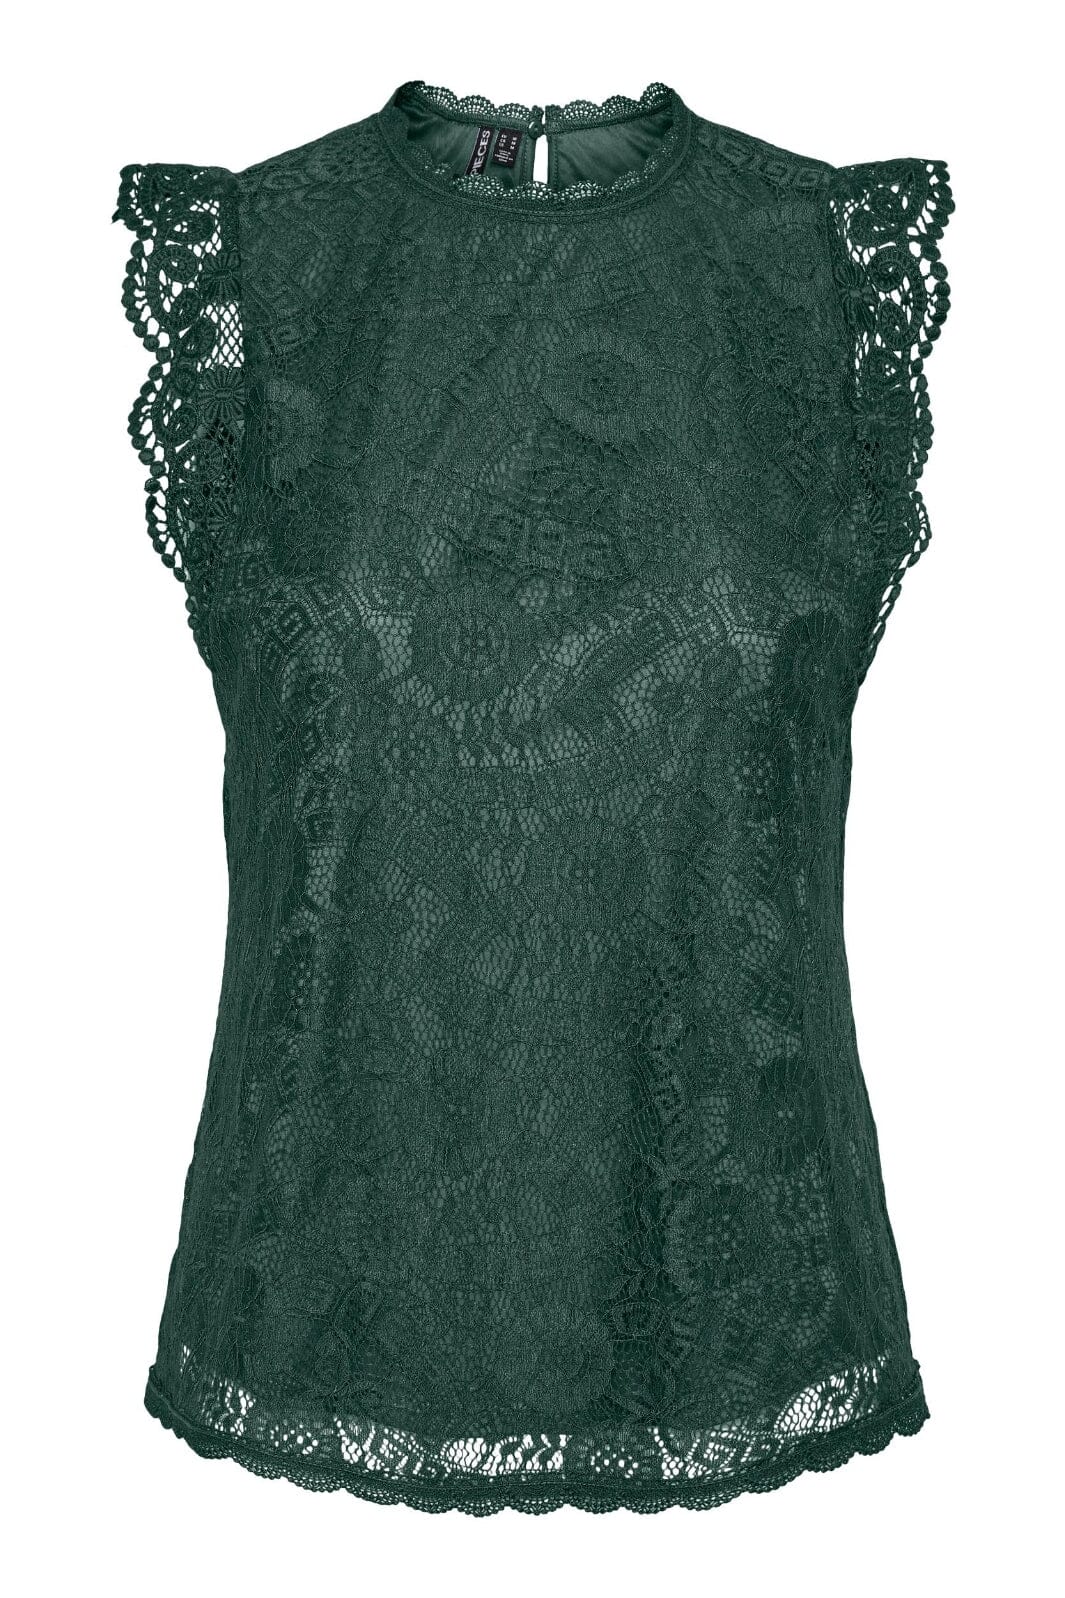 Pieces - Pcolline Sl Lace Top - 4258474 Trekking Green Toppe 